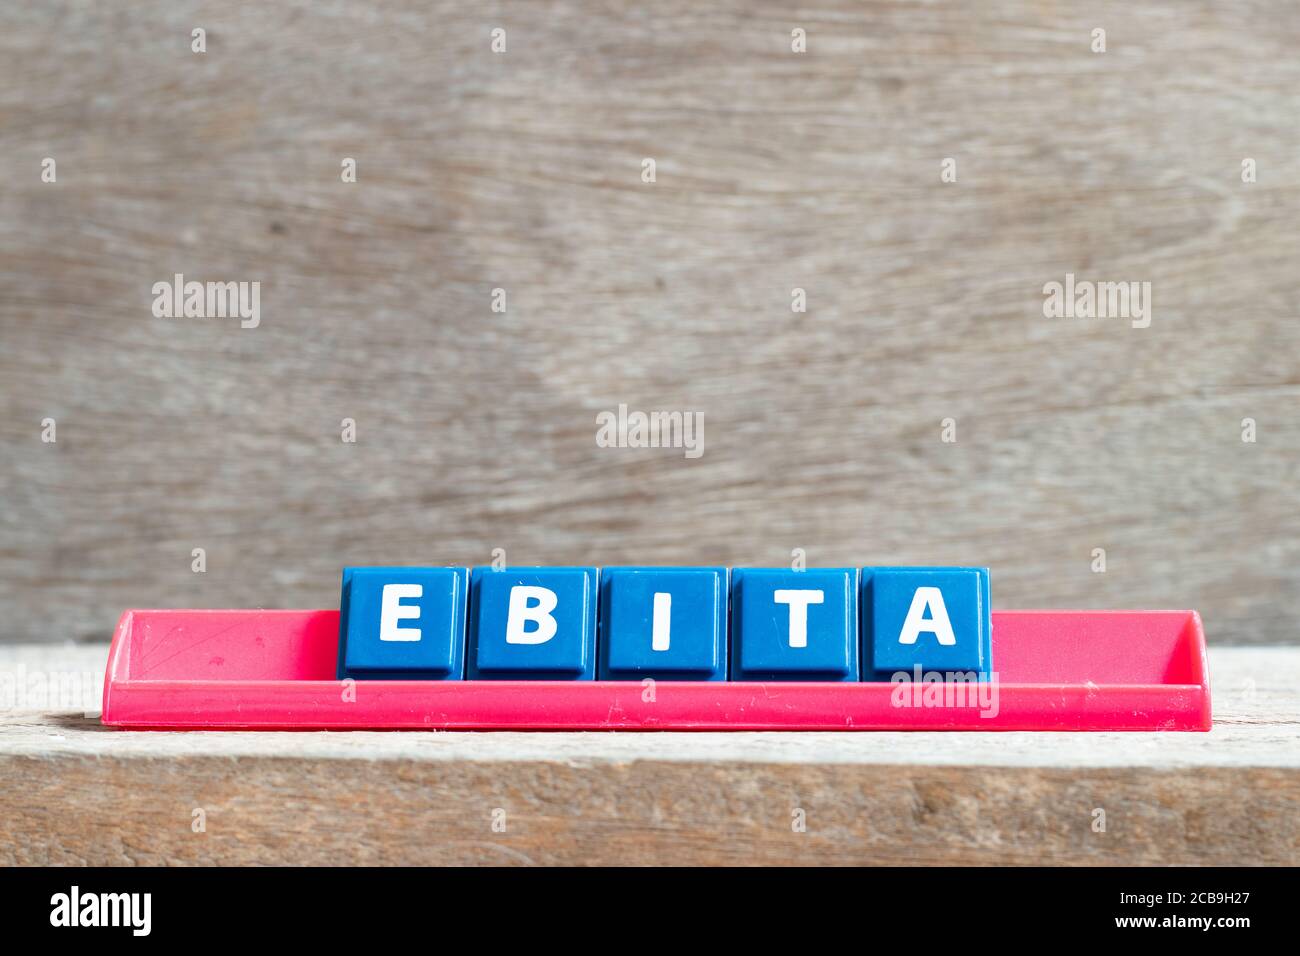 Tile Letter On Red Rack In Word Ebita Abbreviation Of Earnings Before Interest Taxes And 9753